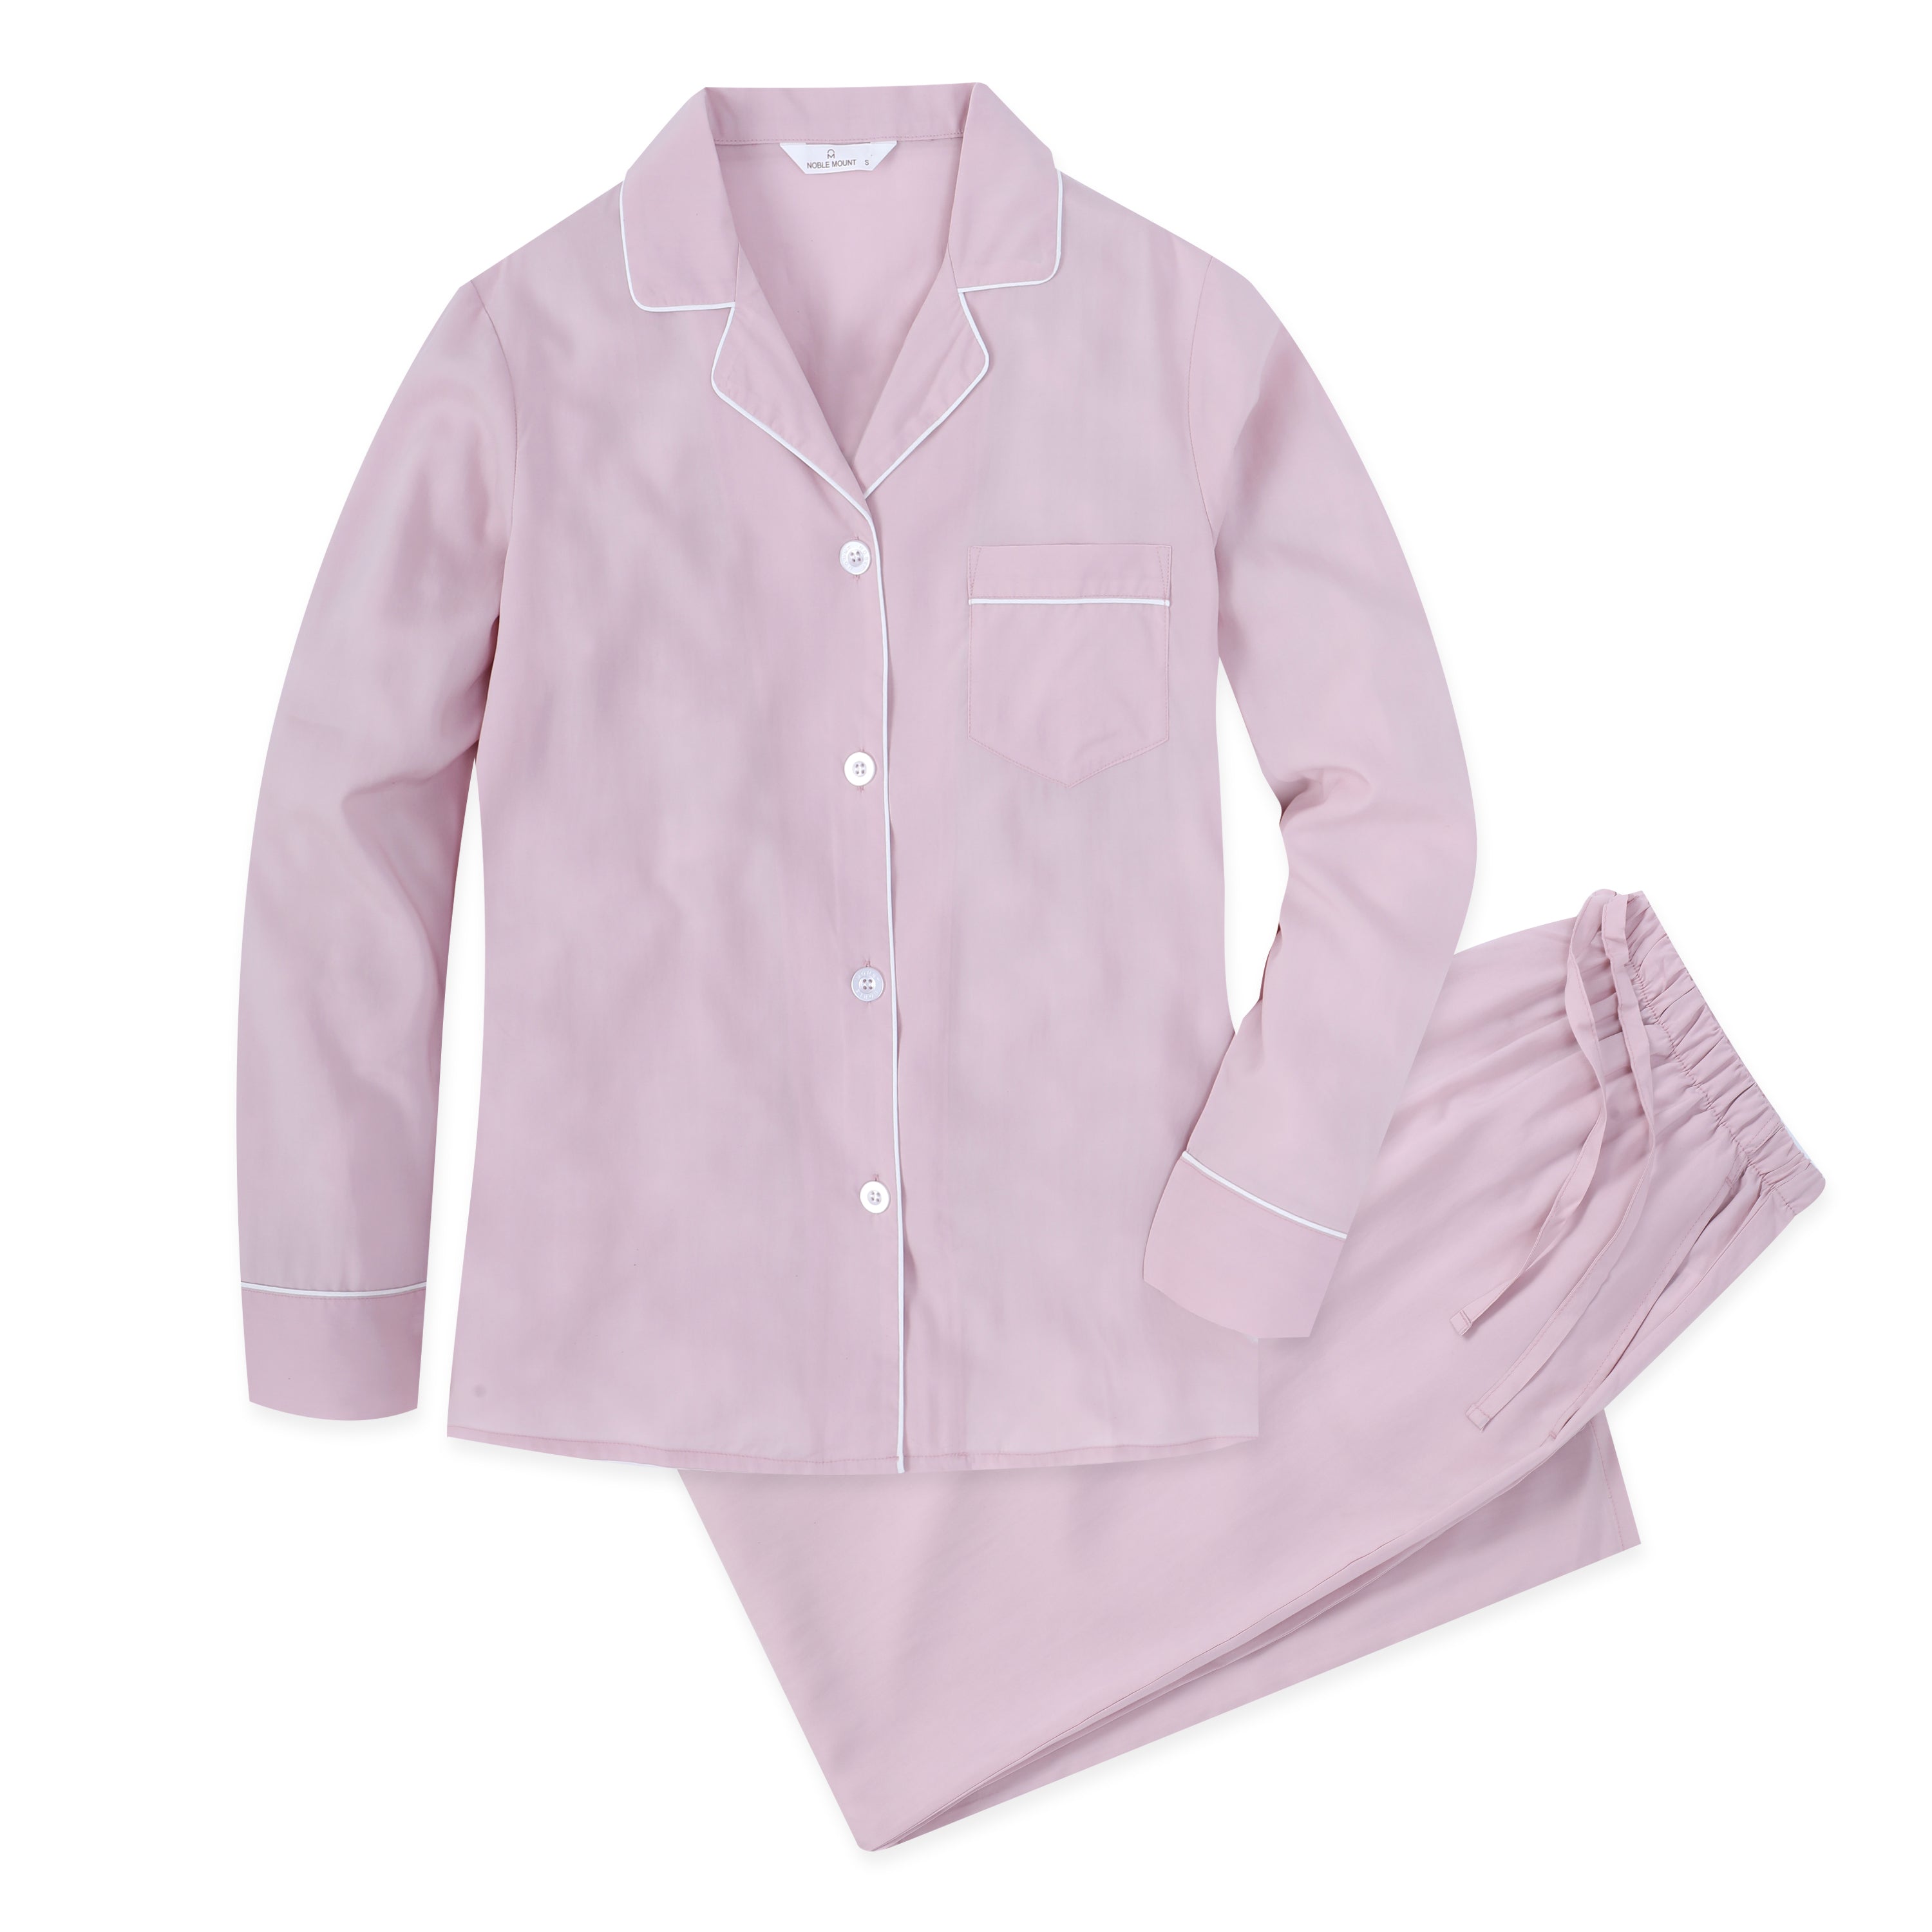 Womens 2-Piece Cooling Pajama Set made from Eucalyptus Tencel - Hypoallergenic and Eco-Friendly Fabric